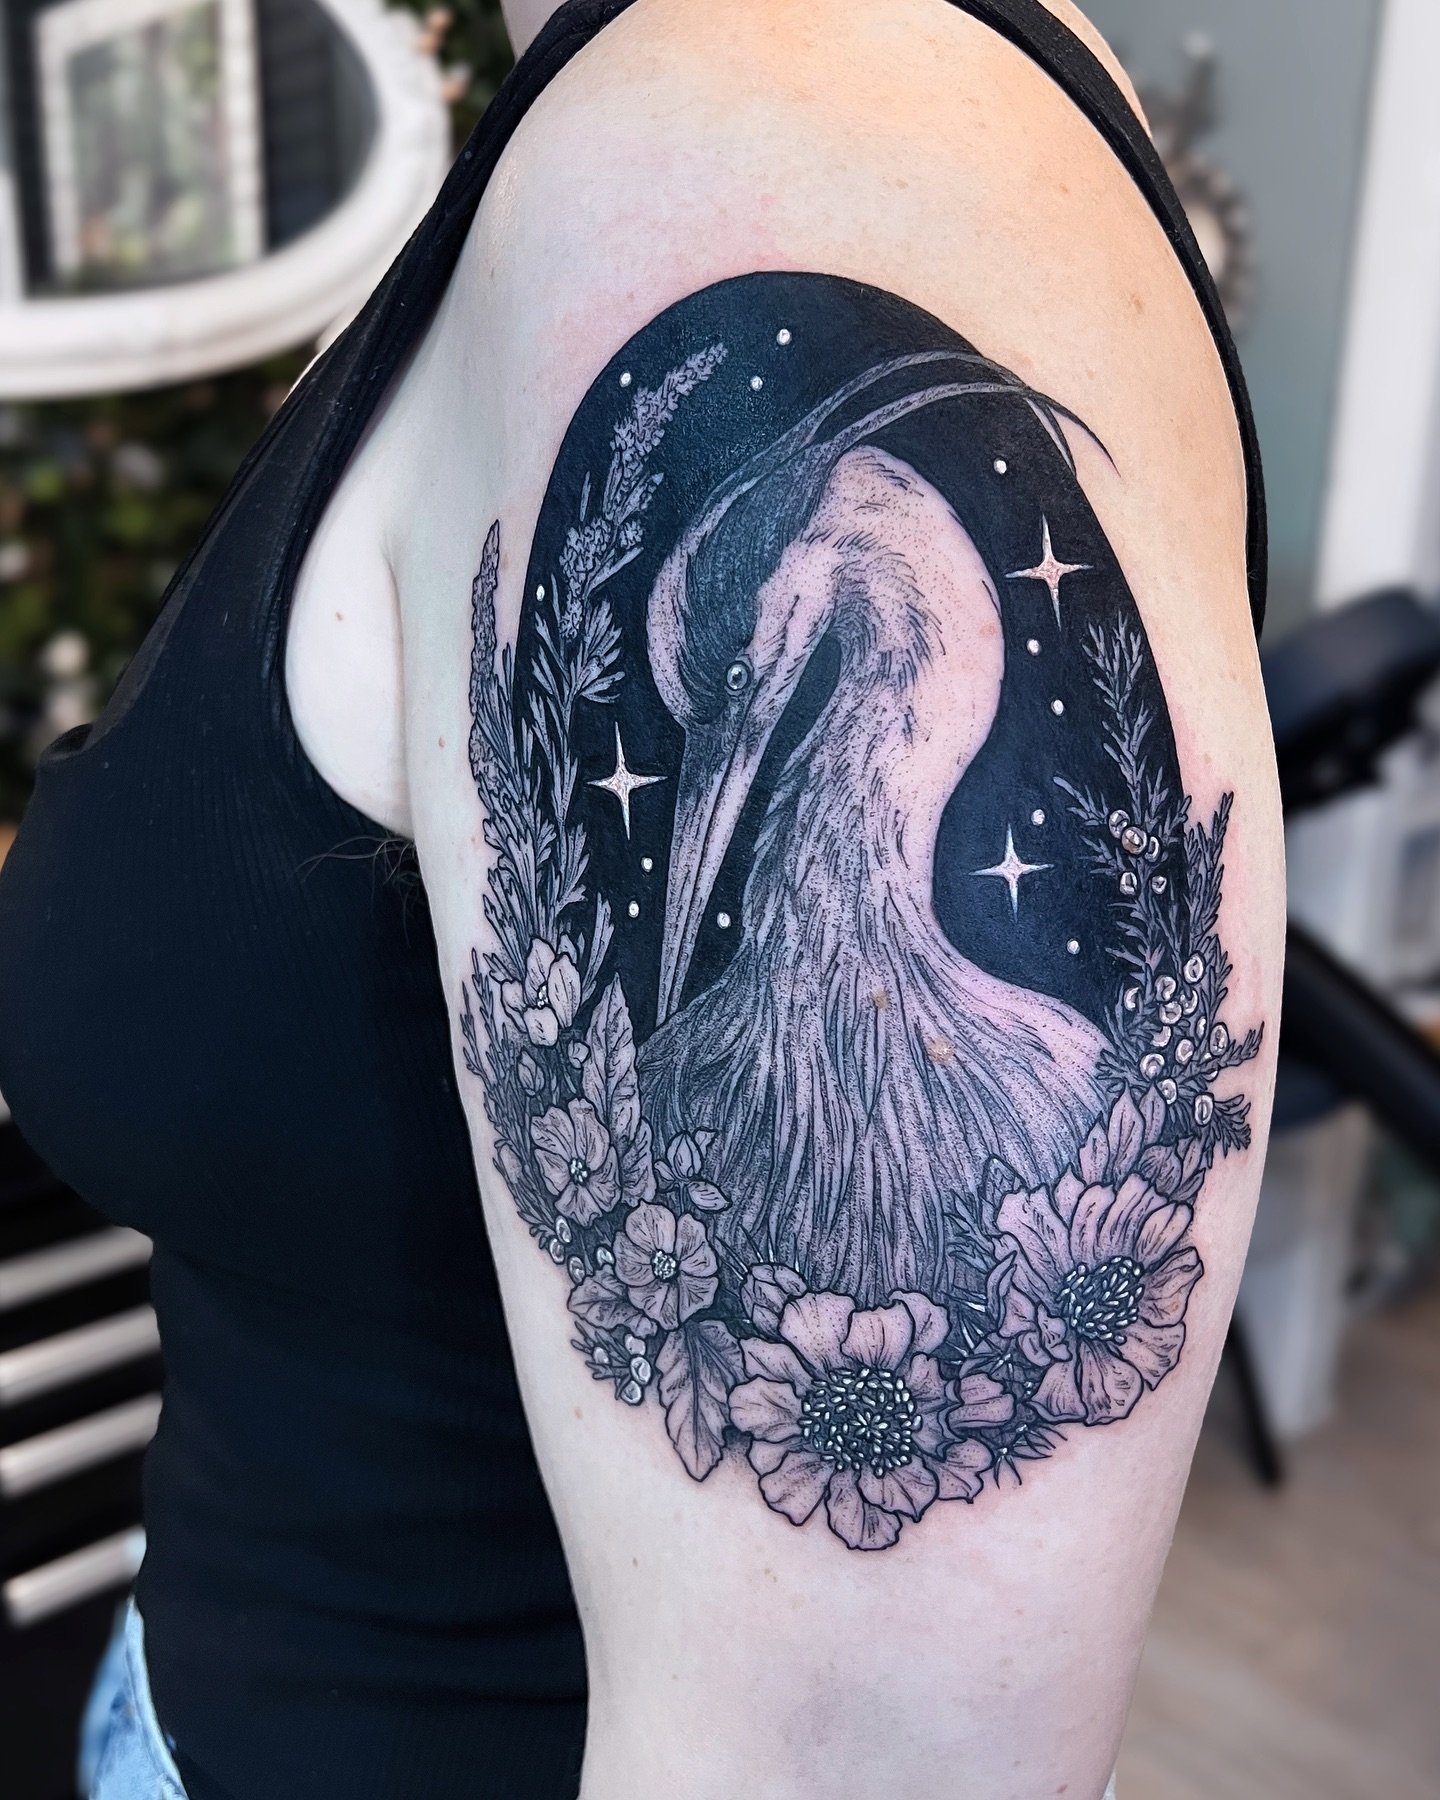 Great blue heron with Colorado desert plants - sagebrush, cholla cactus flowers, juniper, desert globe mallow and rabbit brush 🌑✨ Thanks so much S, it was great chatting pottery with you!